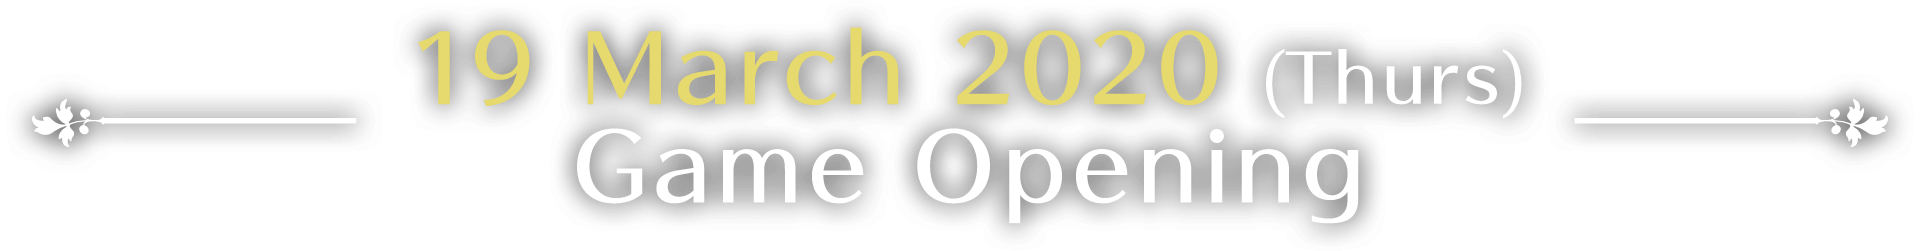 19 March 2020 (Thurs) - Game Opening